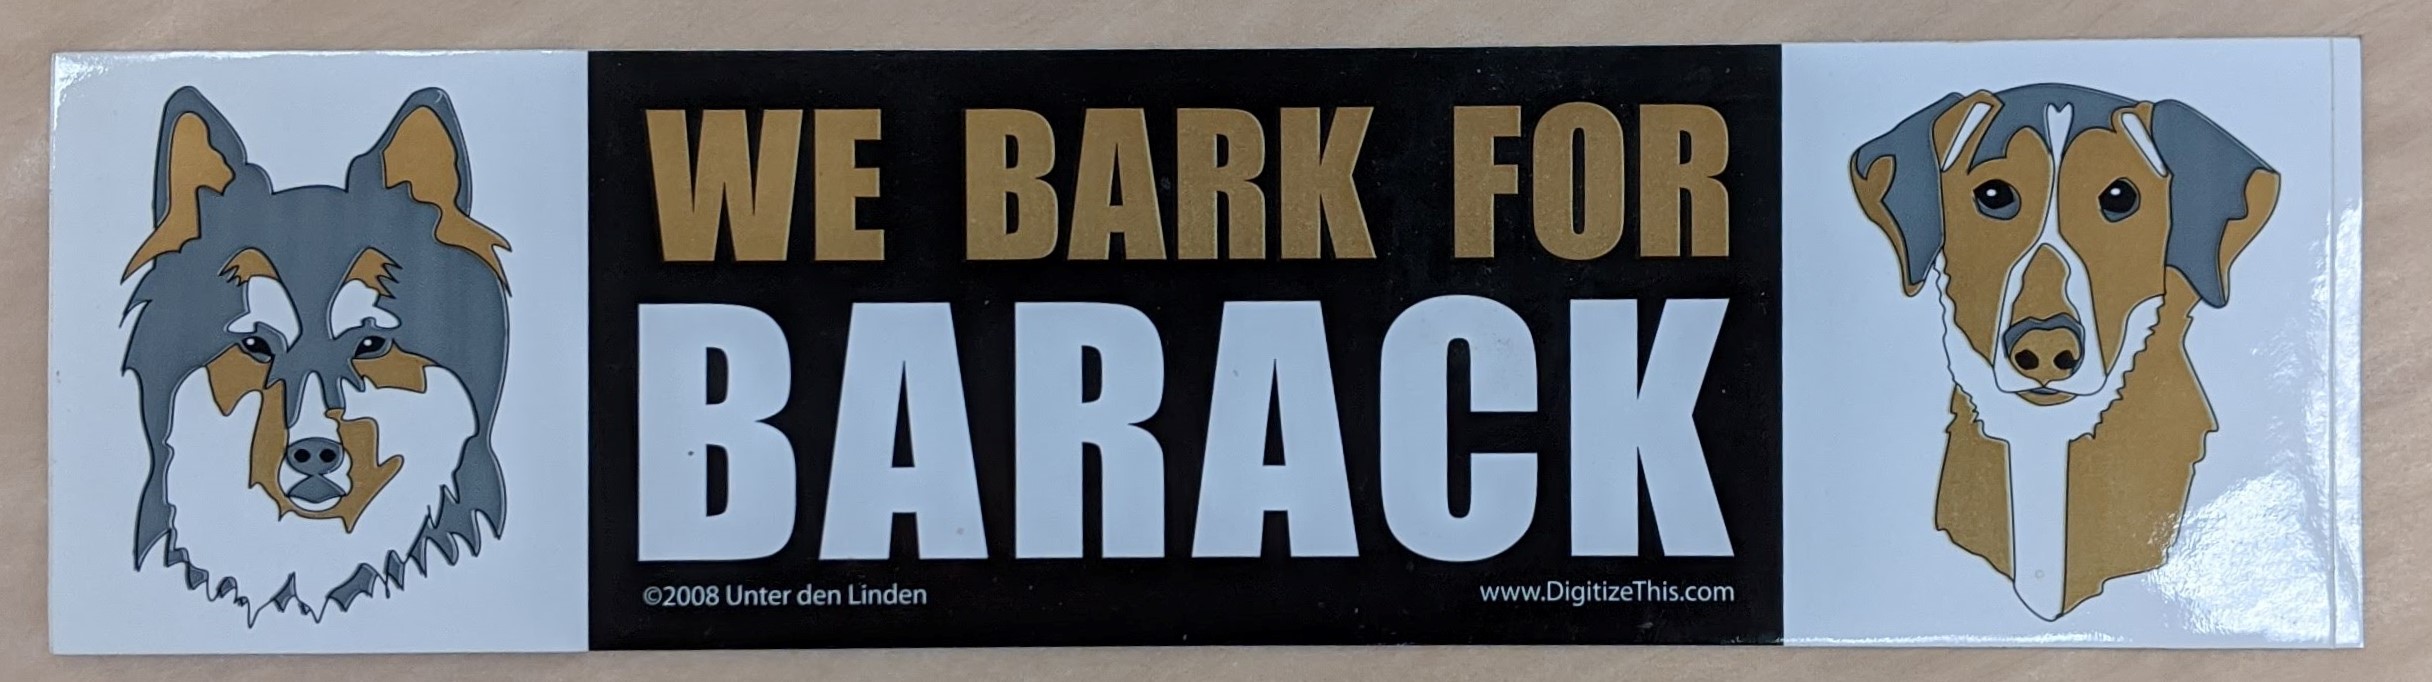 Marlene Mayman, “We Bark for Barack” bumper sticker, 2007-2008, from the Jerome O. Herlihy political campaign ephemera collection